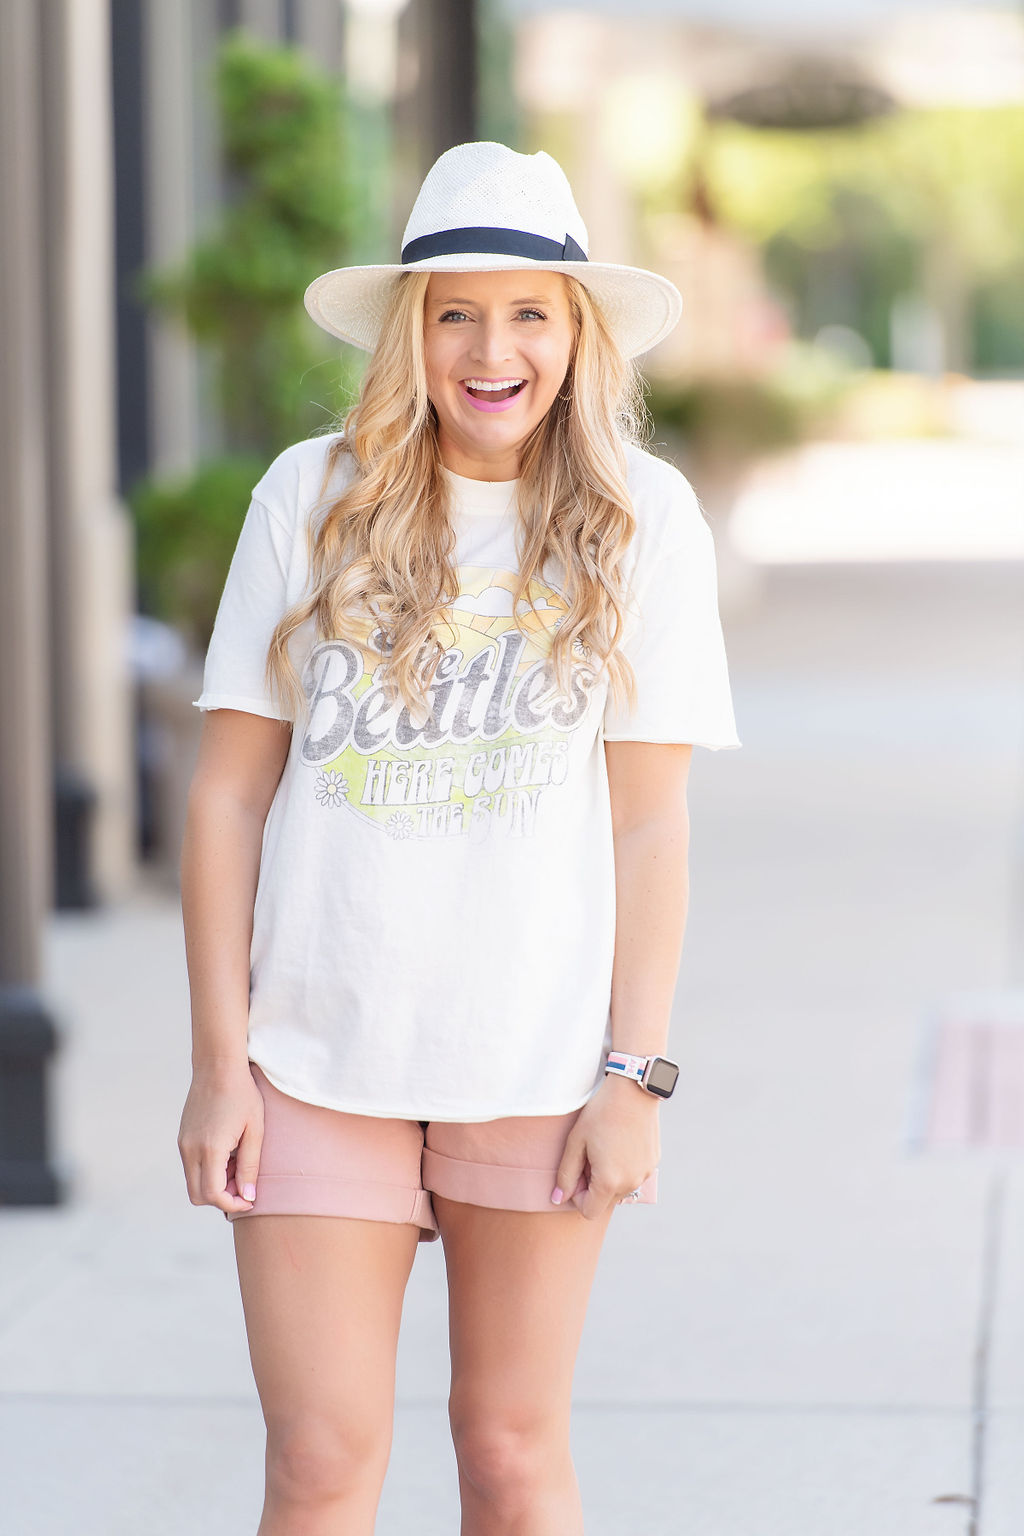 Denim Shorts by popular Houston fashion blog, The House of Fancy: image of a woman standing outside and wearing a The Beatles graphic t-shirt, pink denim shorts, white fedora hat, and studded gold strap sandals. 